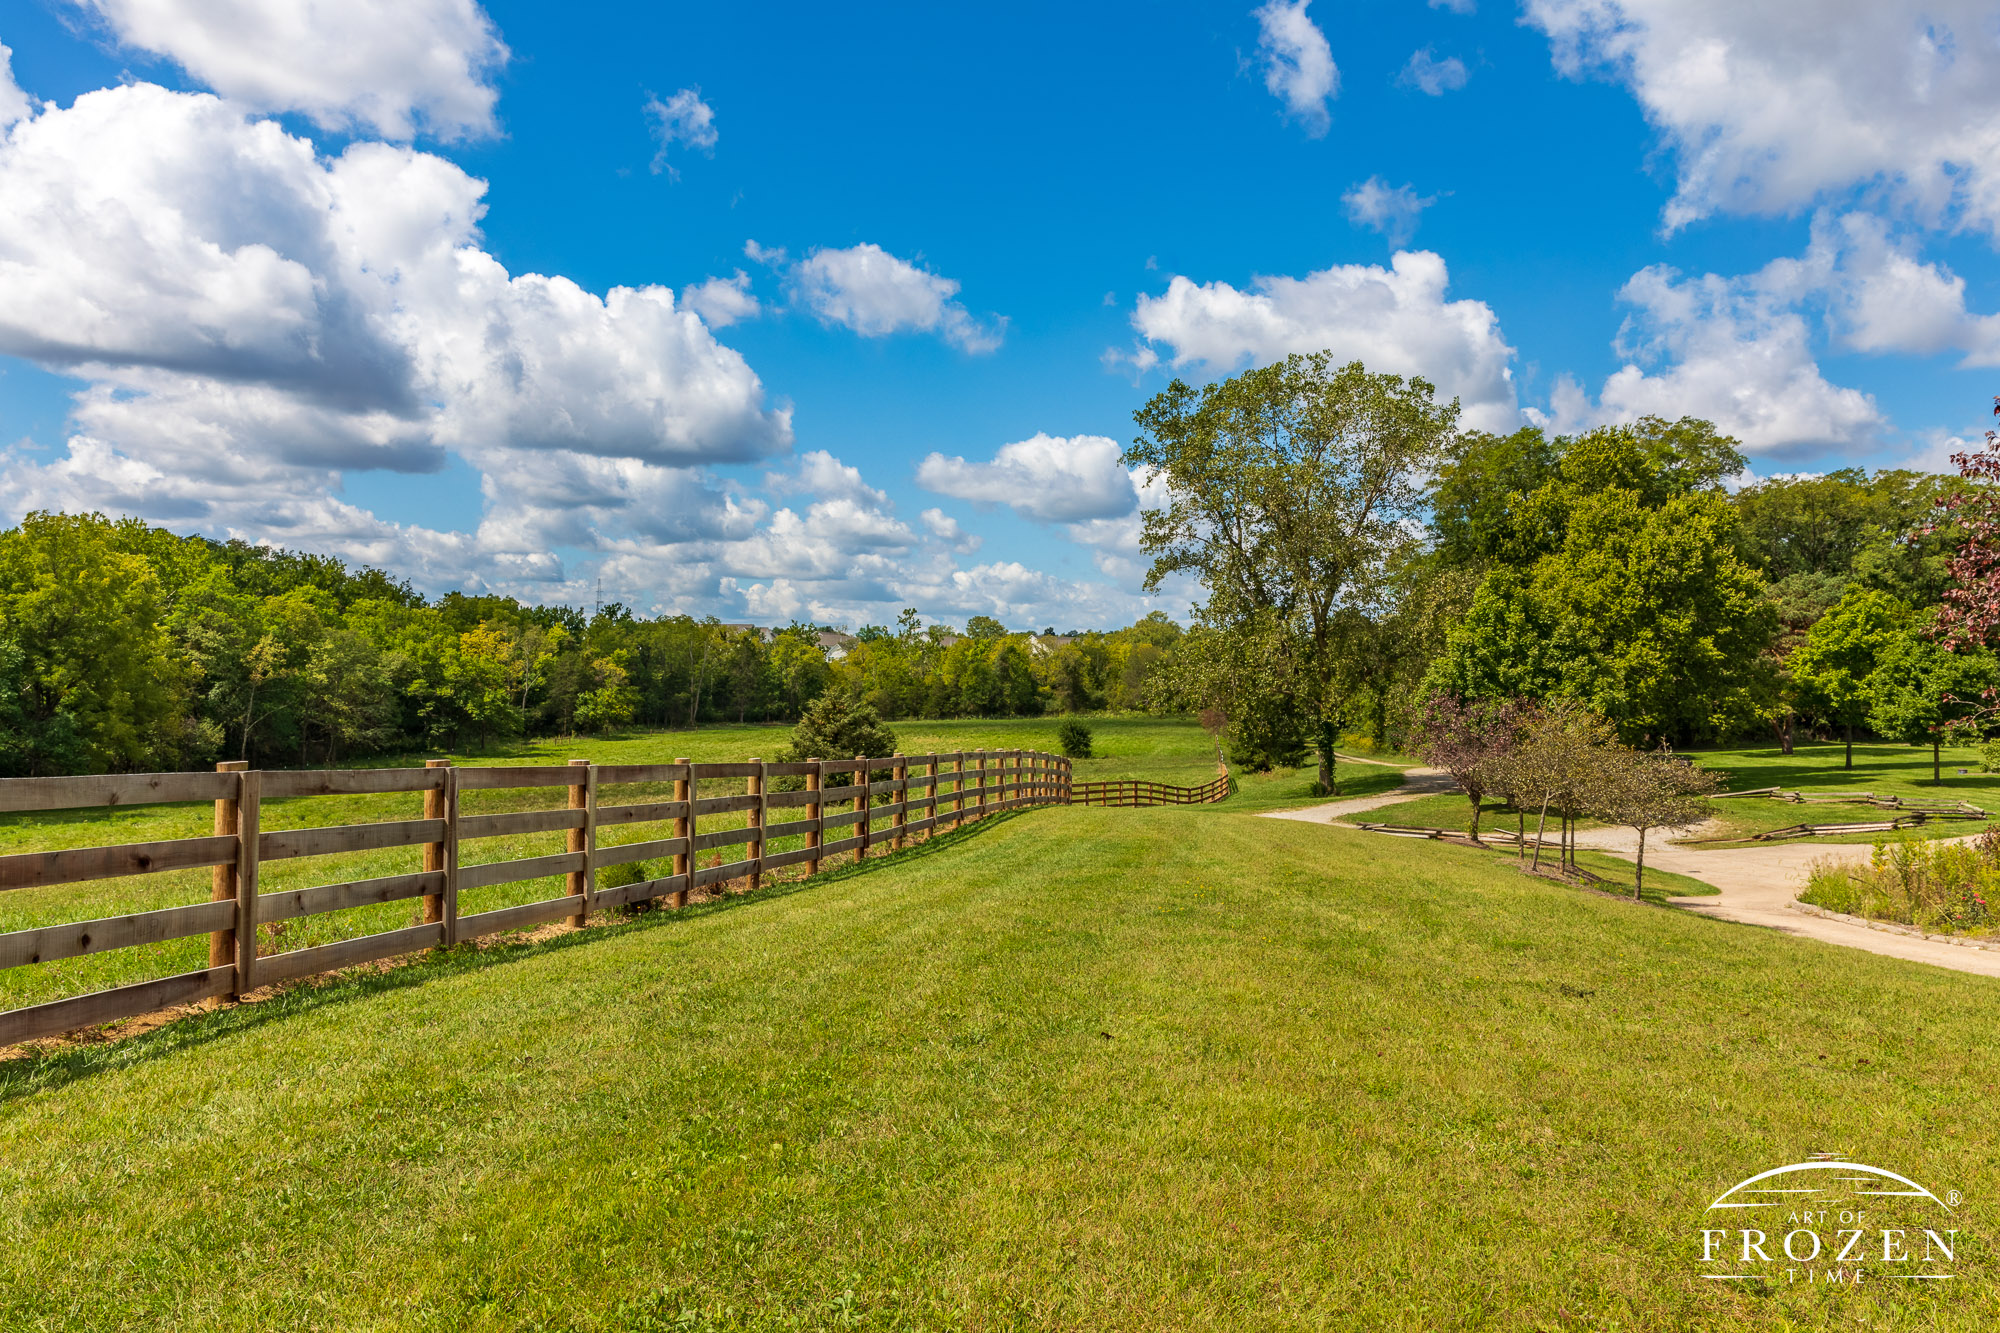 A horse pasture fence at Carriage Hill MetroPark following the rolling terrain